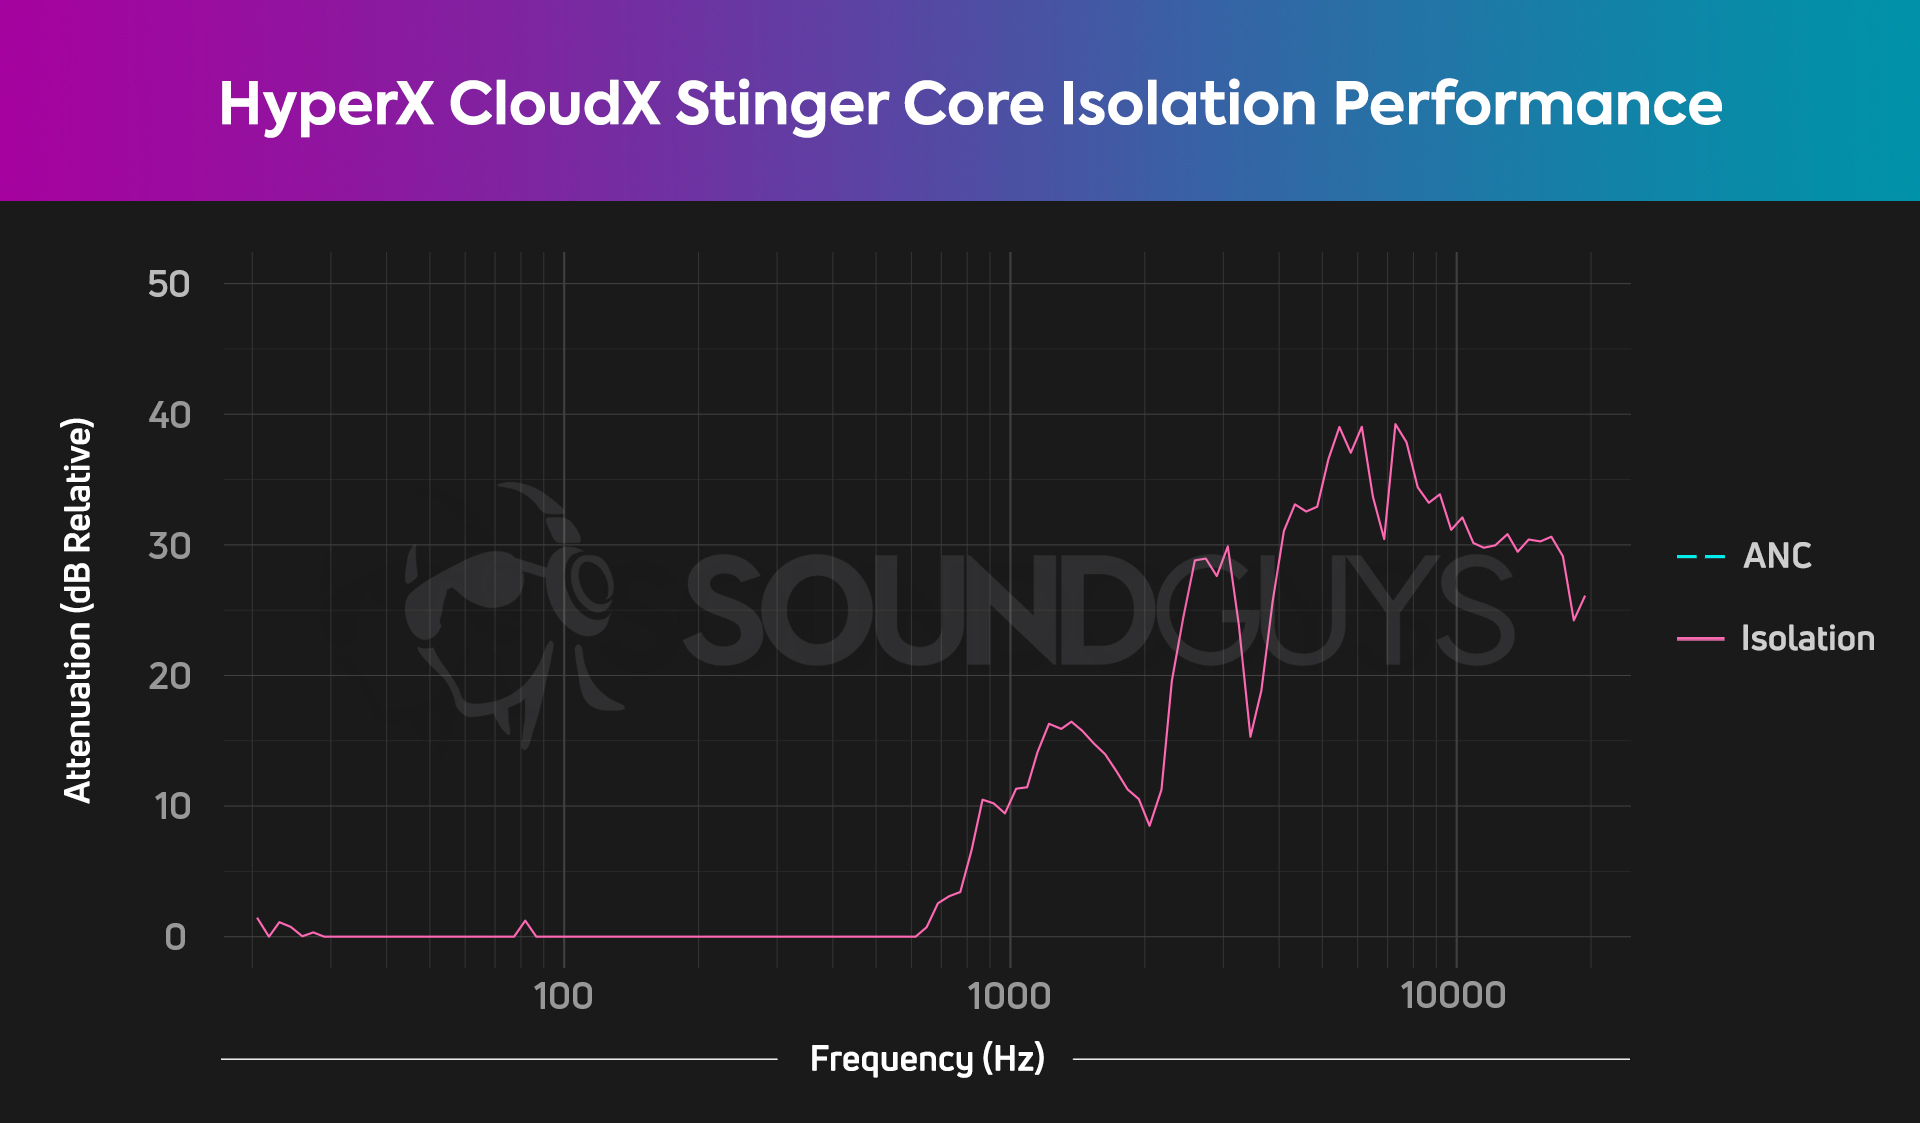 An isolation chart for the hyperX CloudX Stinger Core gaming headset which shows pretty average isolation for a gaming headset.